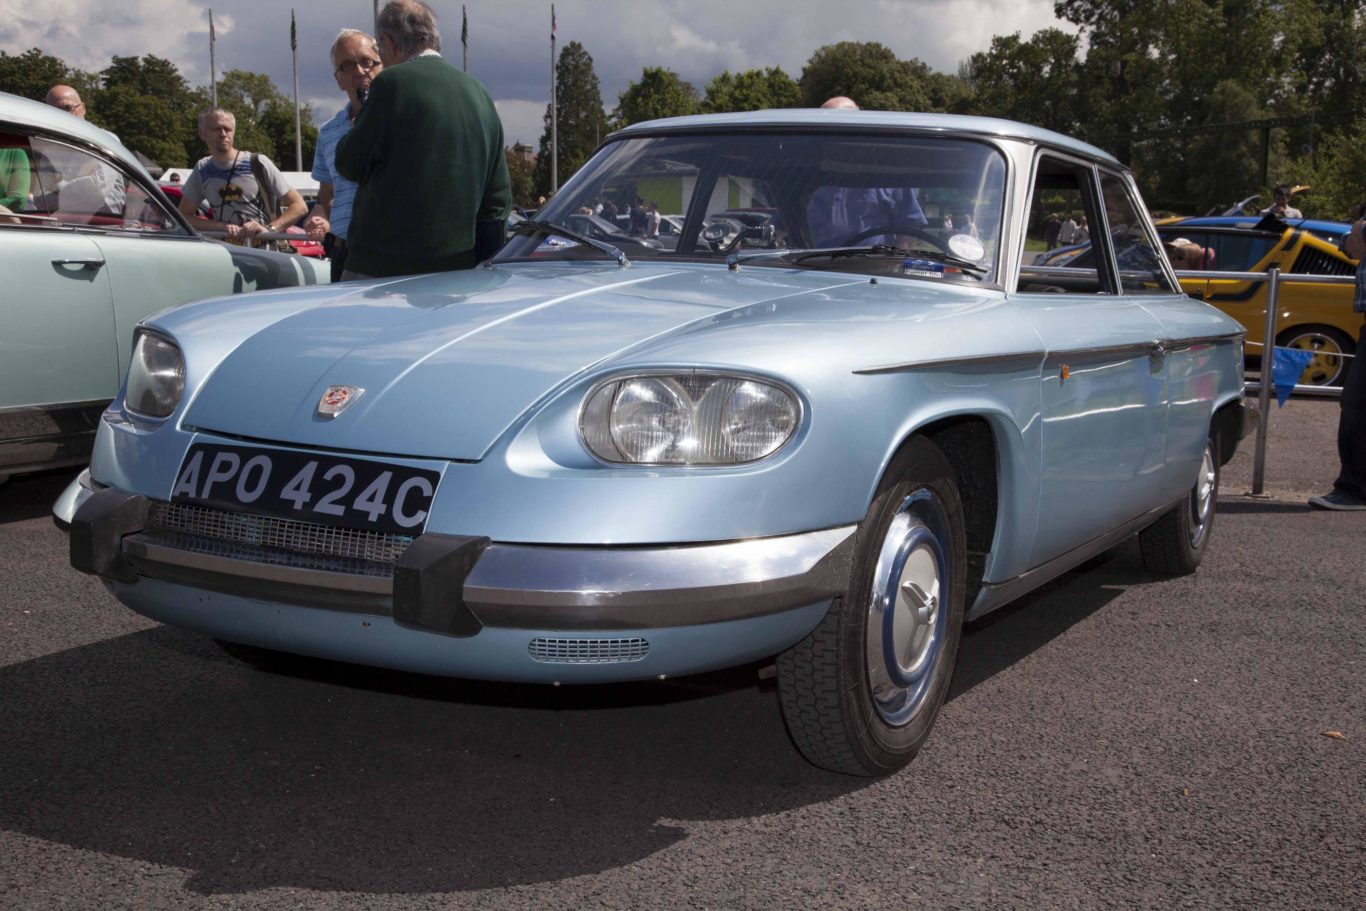 The 24 was the last car Panhard built before concentrating on military vehicles